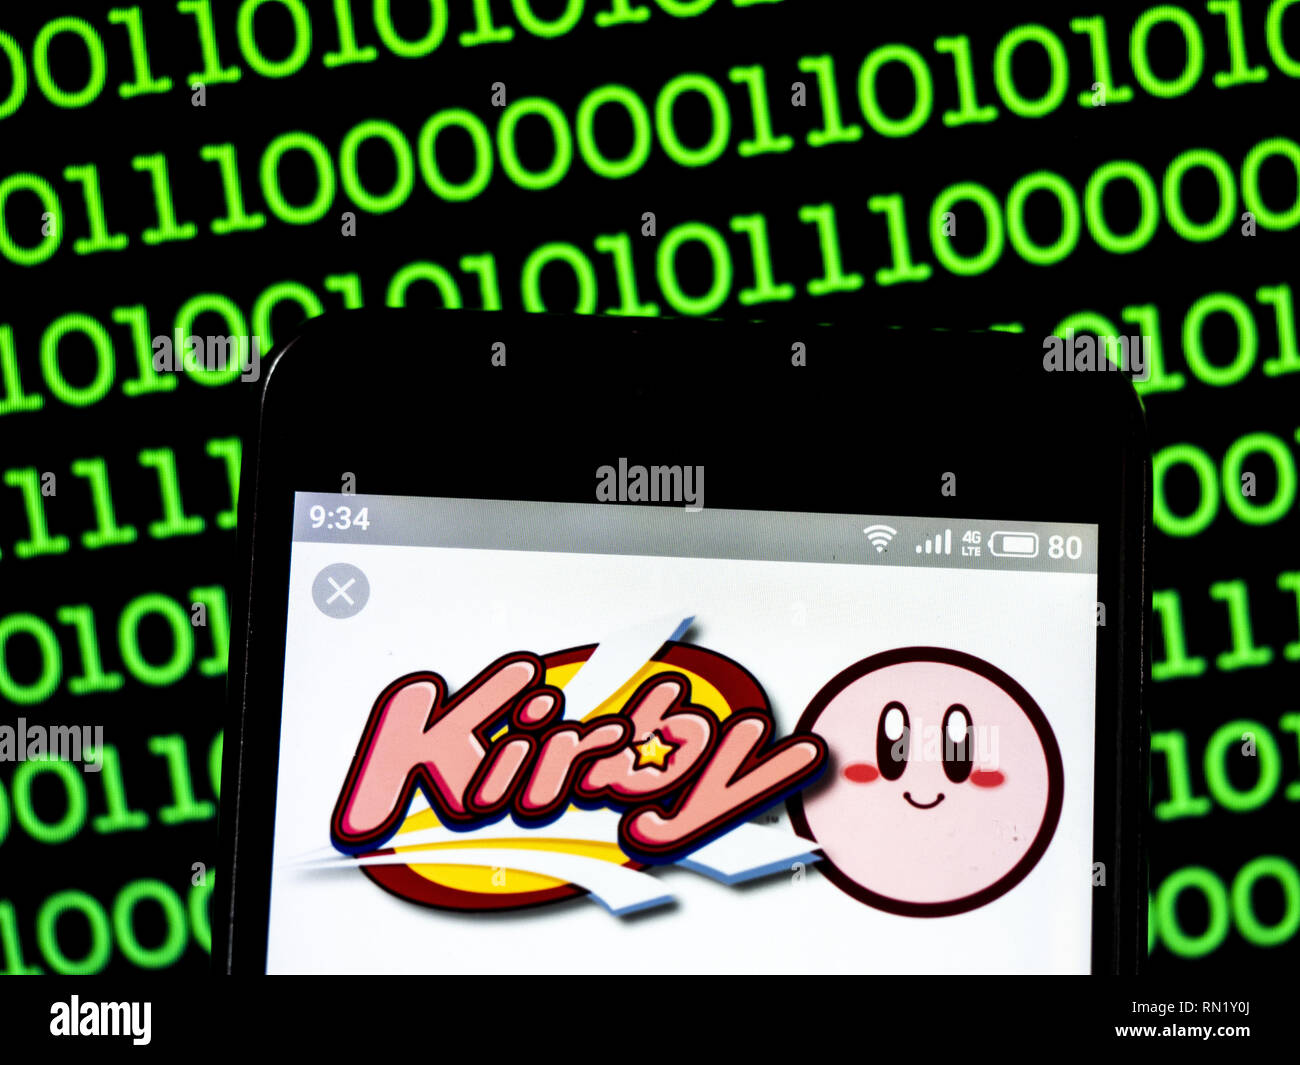 Kirby Nintendo High Resolution Stock Photography and Images - Alamy